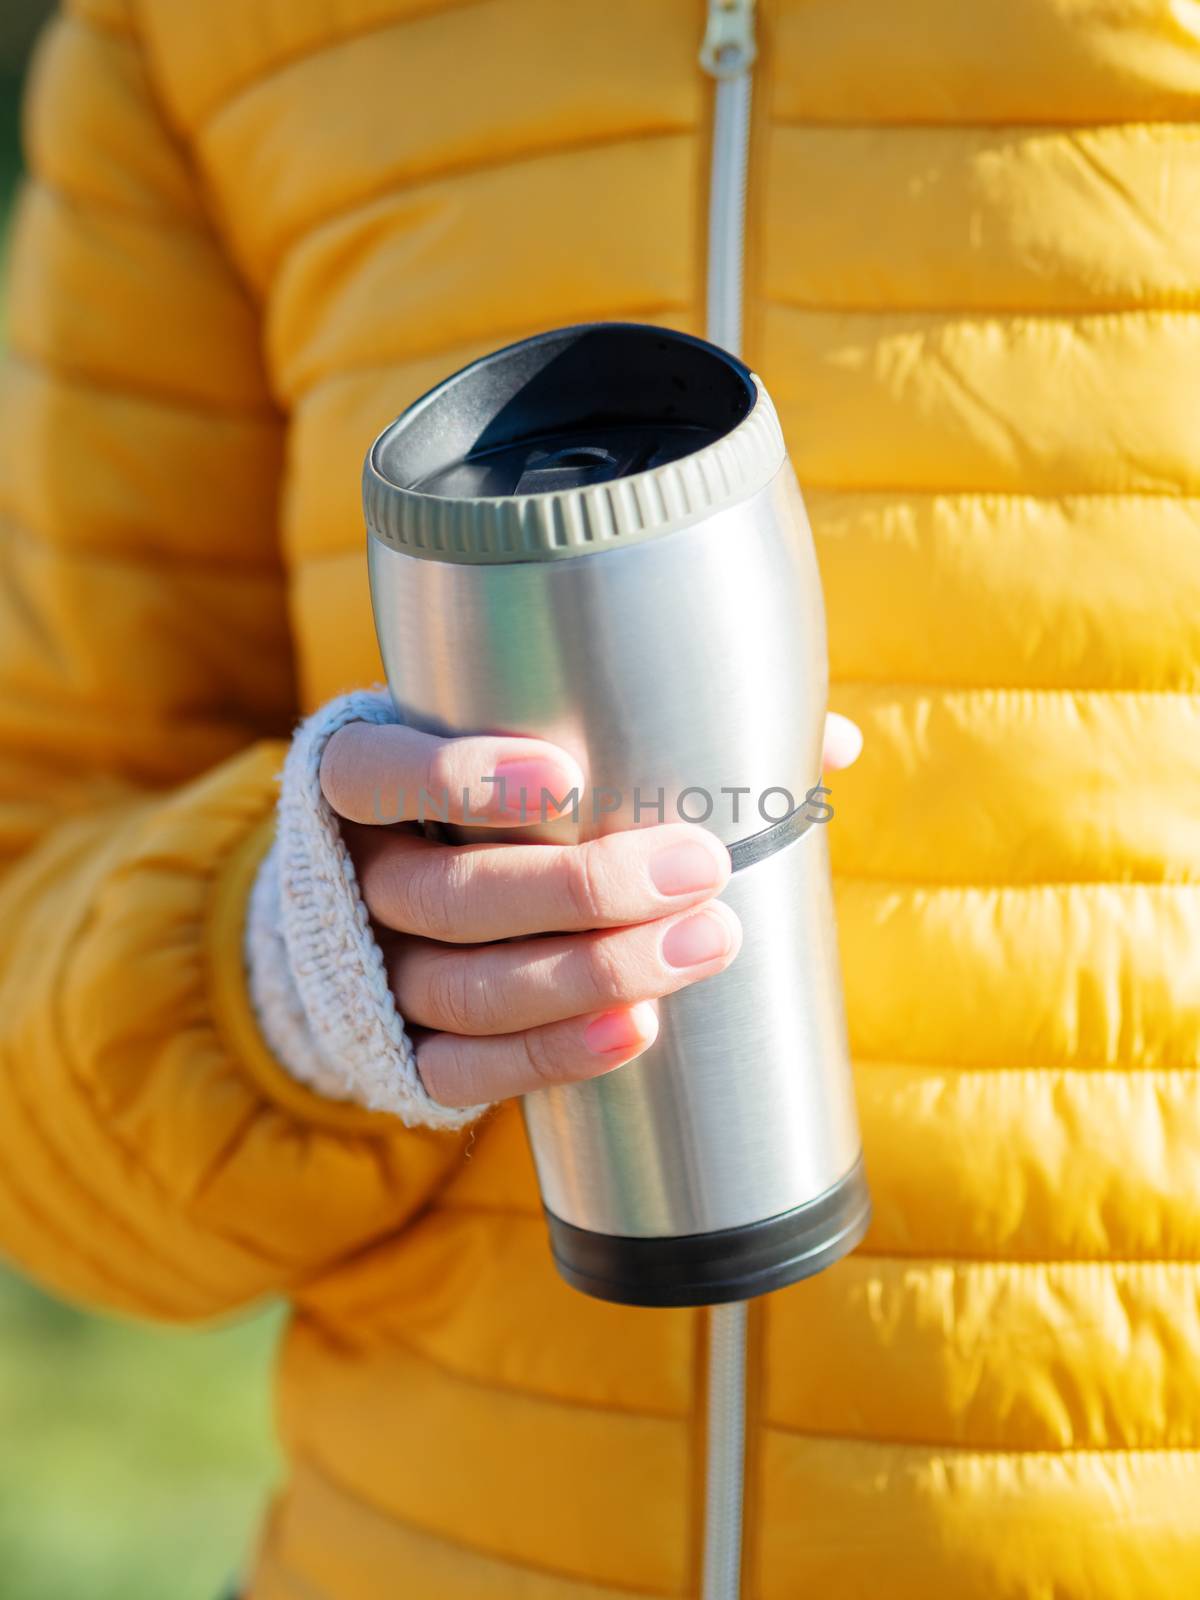 Women in bright yellow jacket is holding thermos mug. Hot tea or other beverage on cool autumn day.